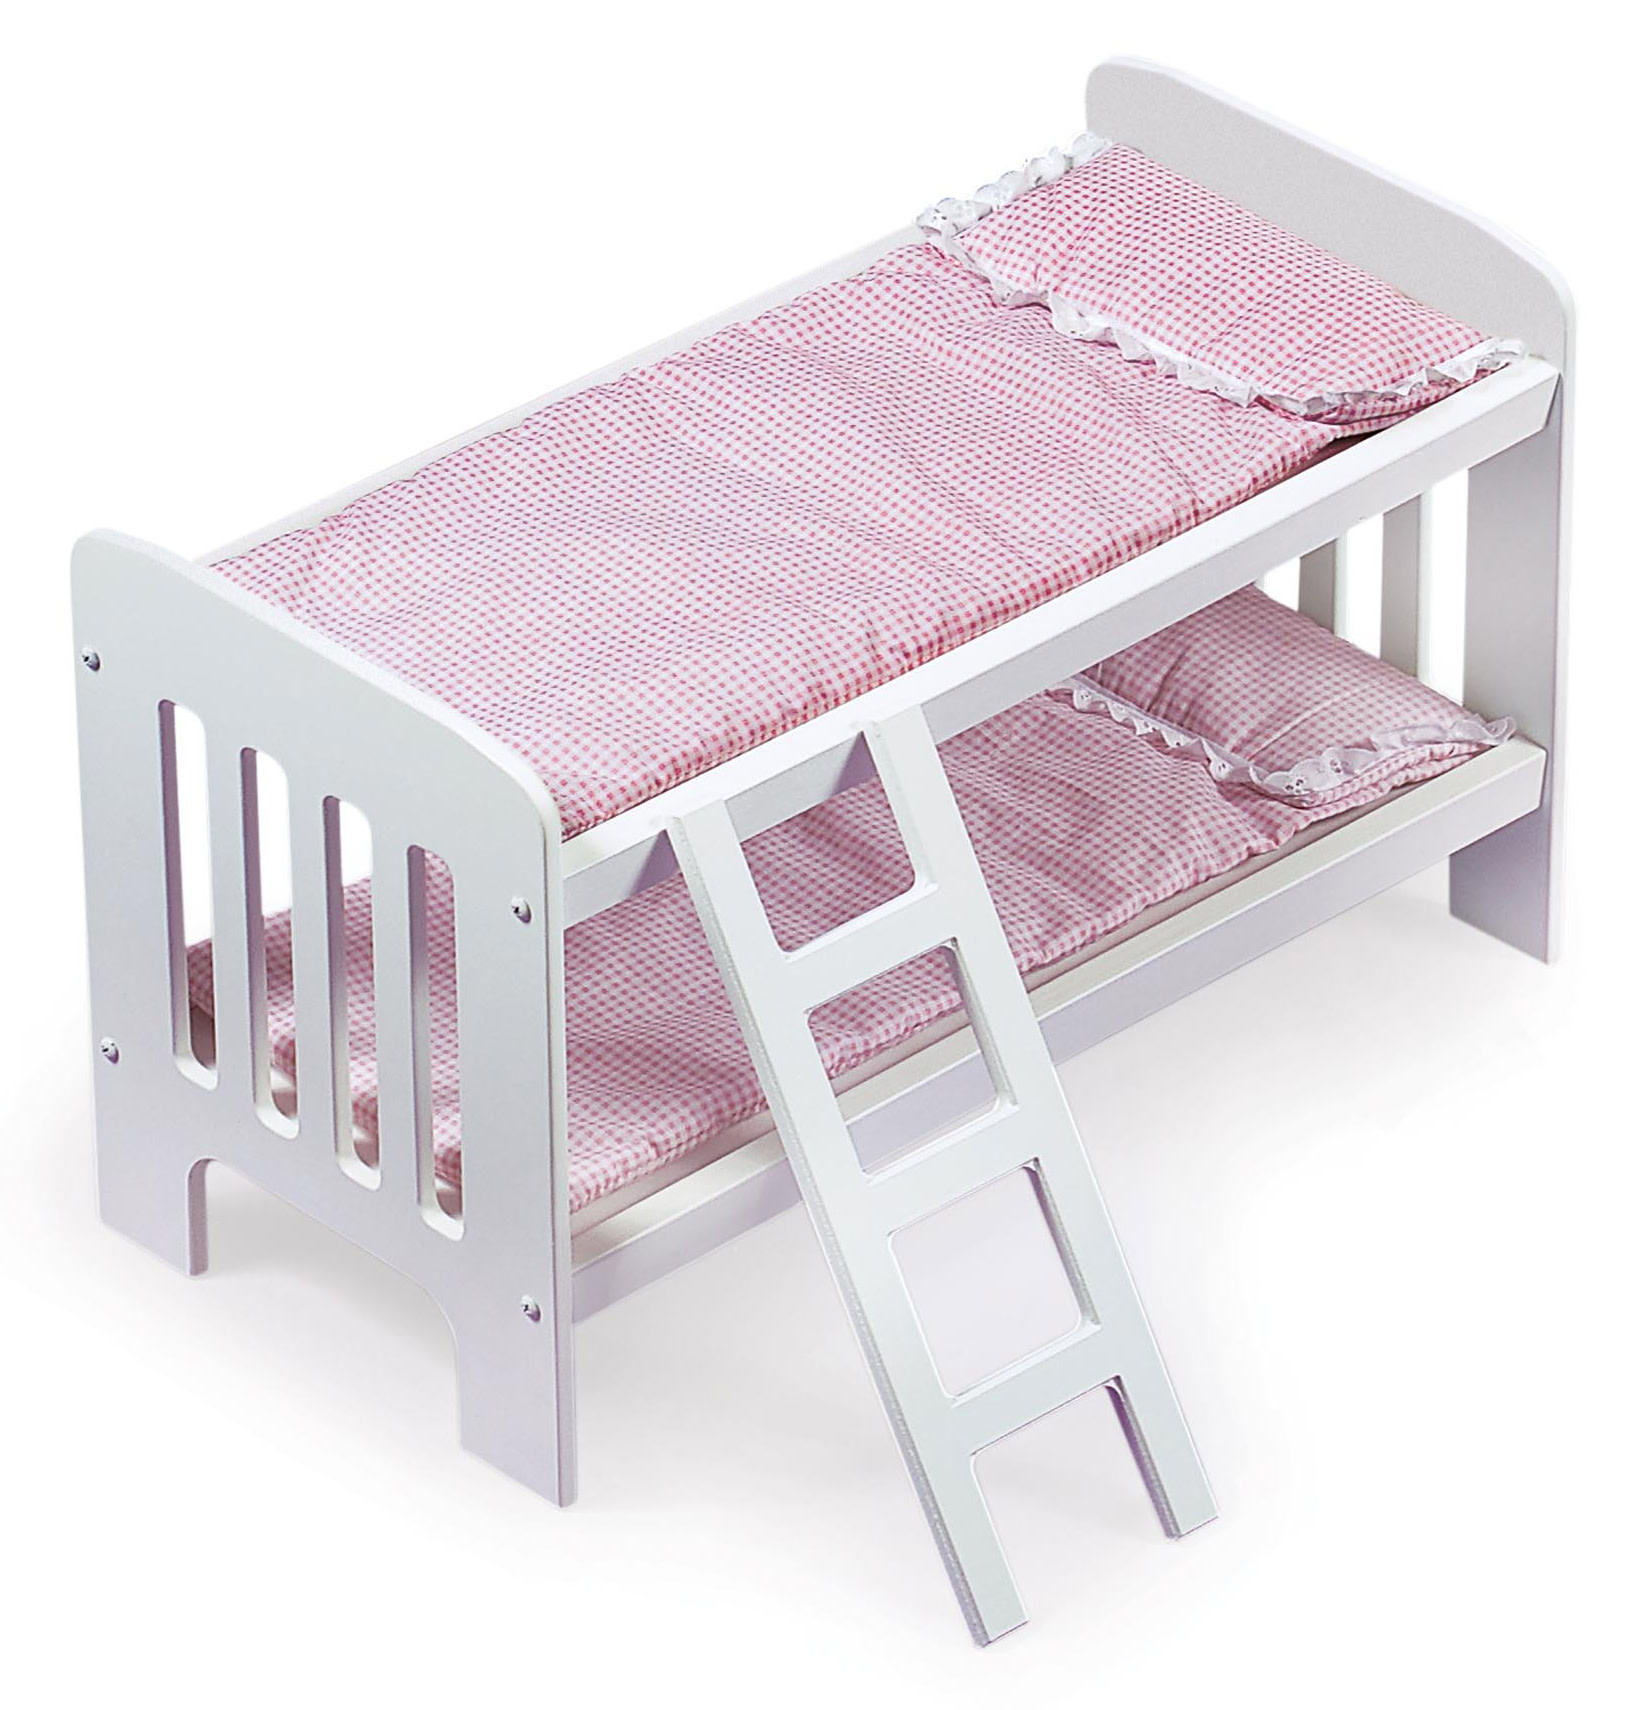 Badger Basket Doll Bunk Bed with Bedding, Ladder, and Free Personalization Kit - White/Pink/Gingham - image 1 of 11